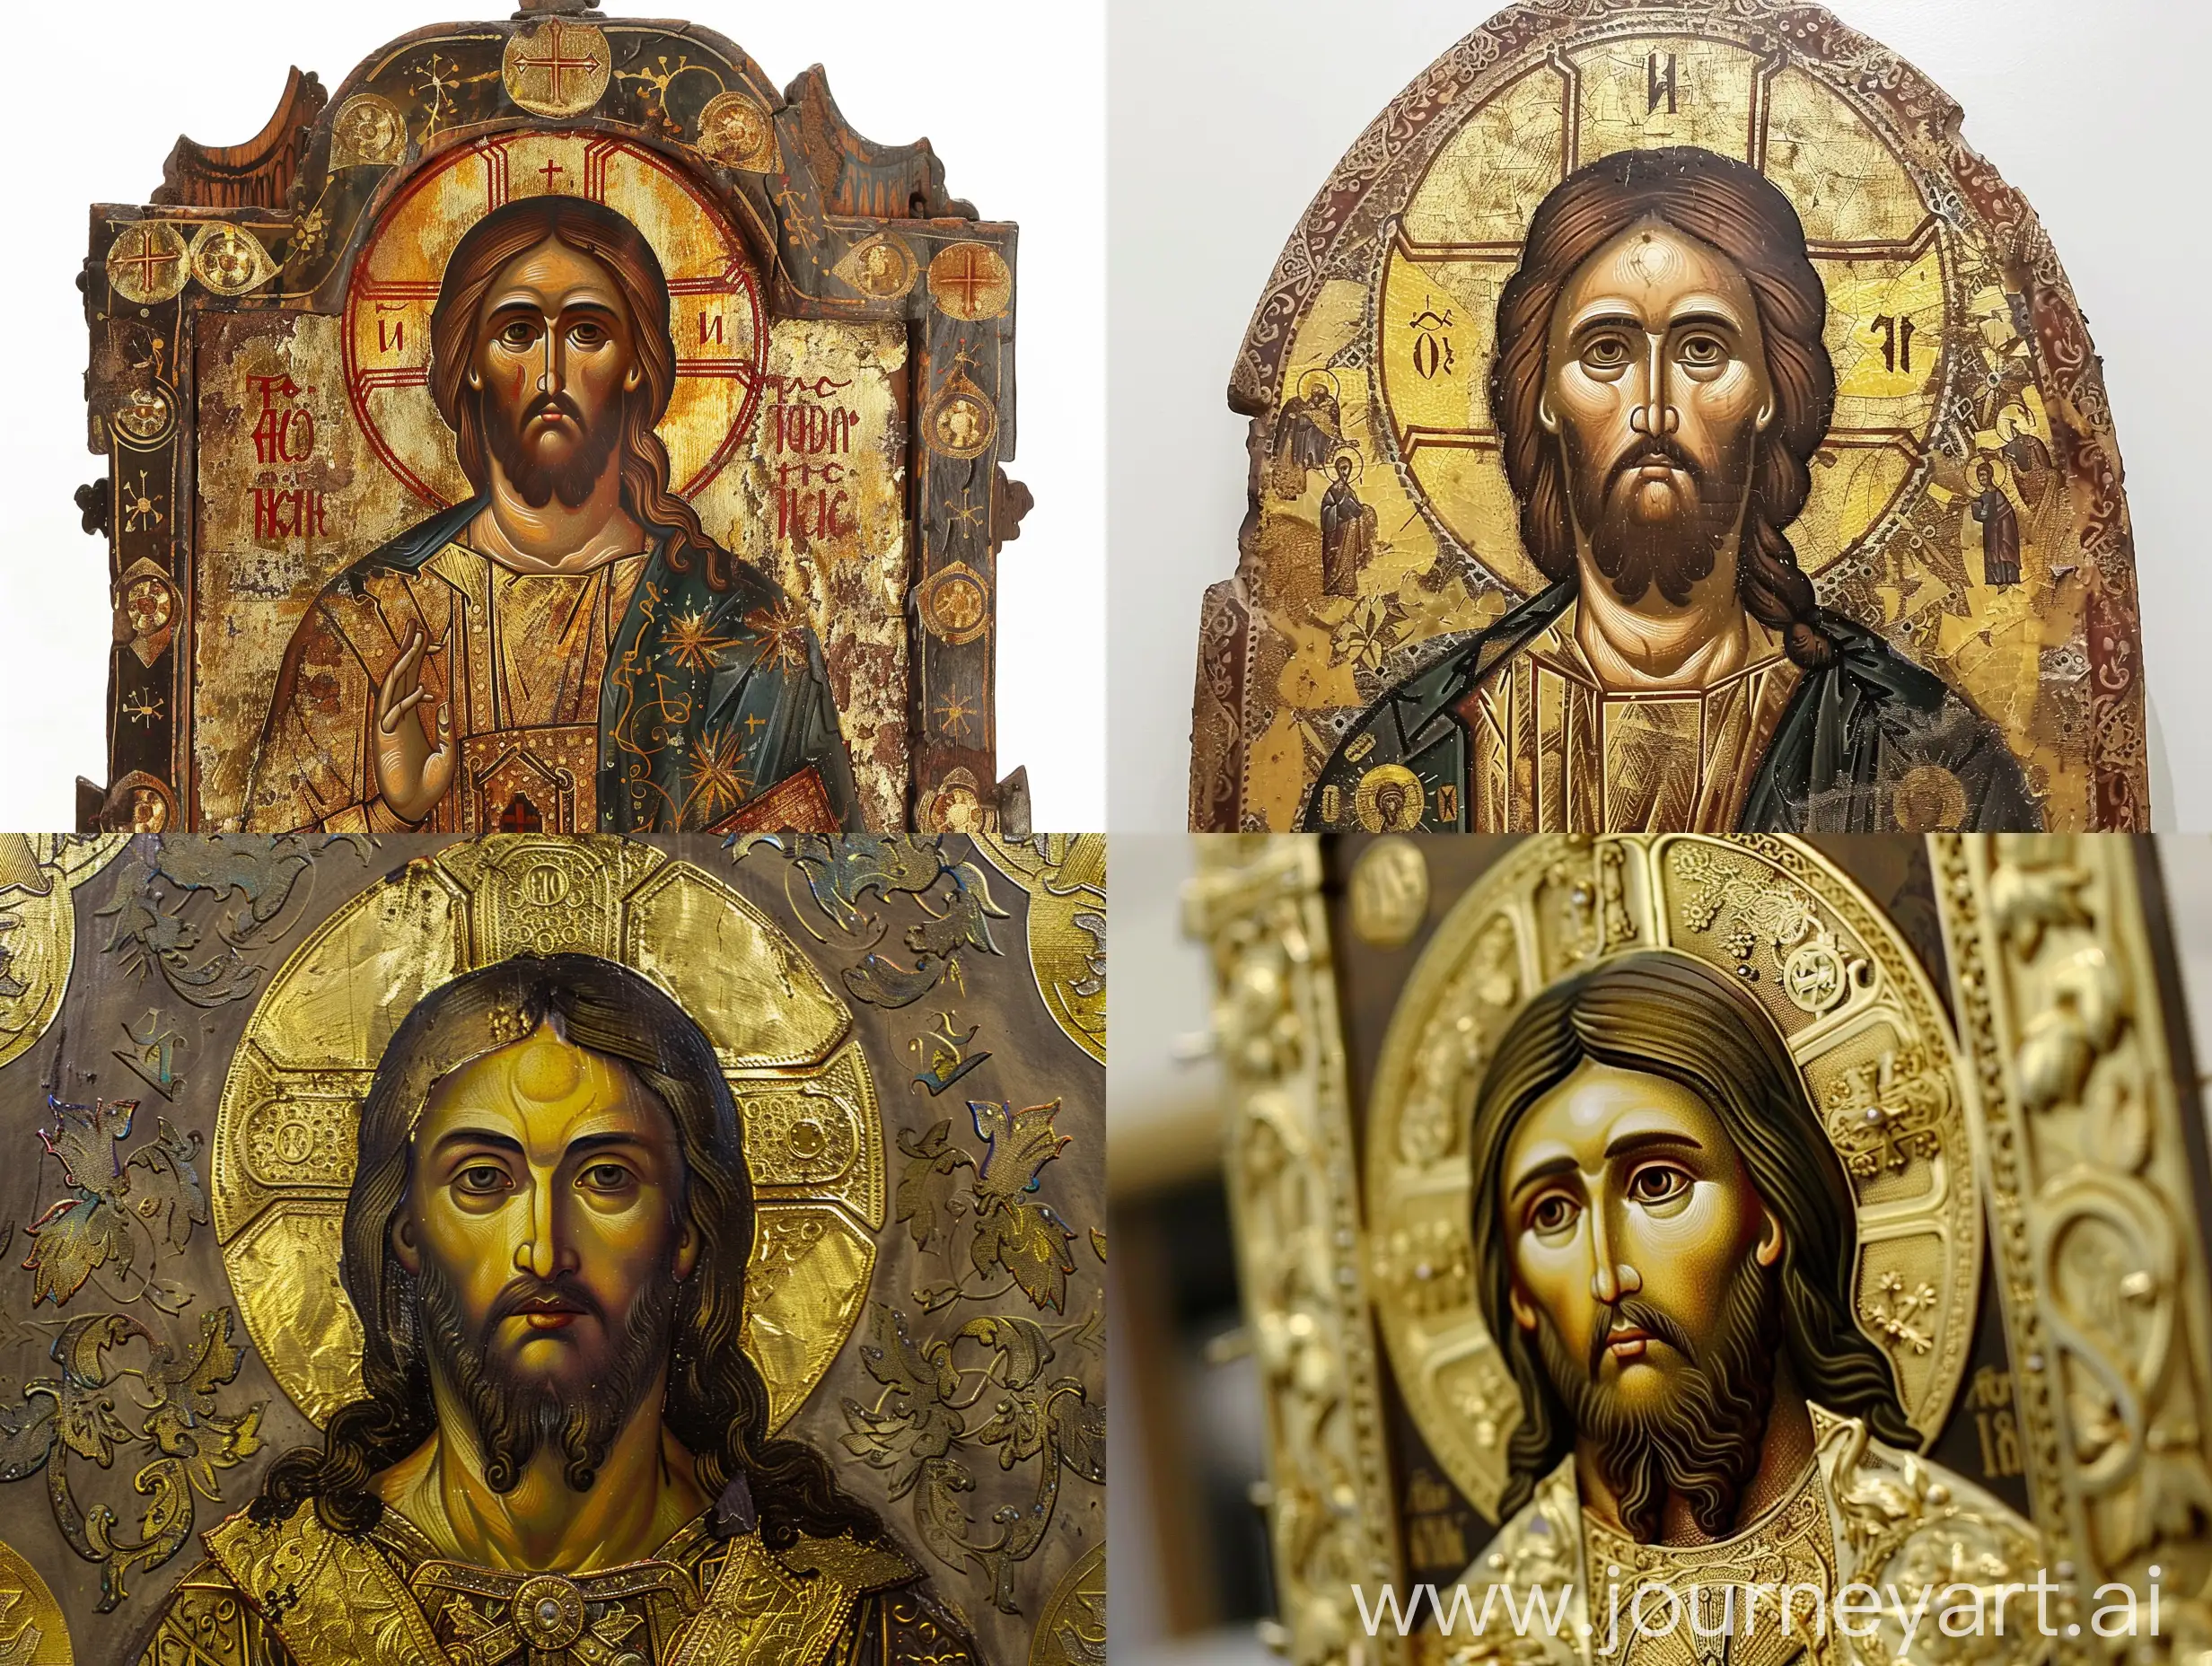 Russian Orthodox Icon of Christ: "A meticulously crafted Orthodox icon of Christ featuring Slavic characteristics and symbols, adorned with gold leaf and intricate patterns." based in Anatoly Timofeevich Fomenko e Gleb Vladimirovich Nosovsk books